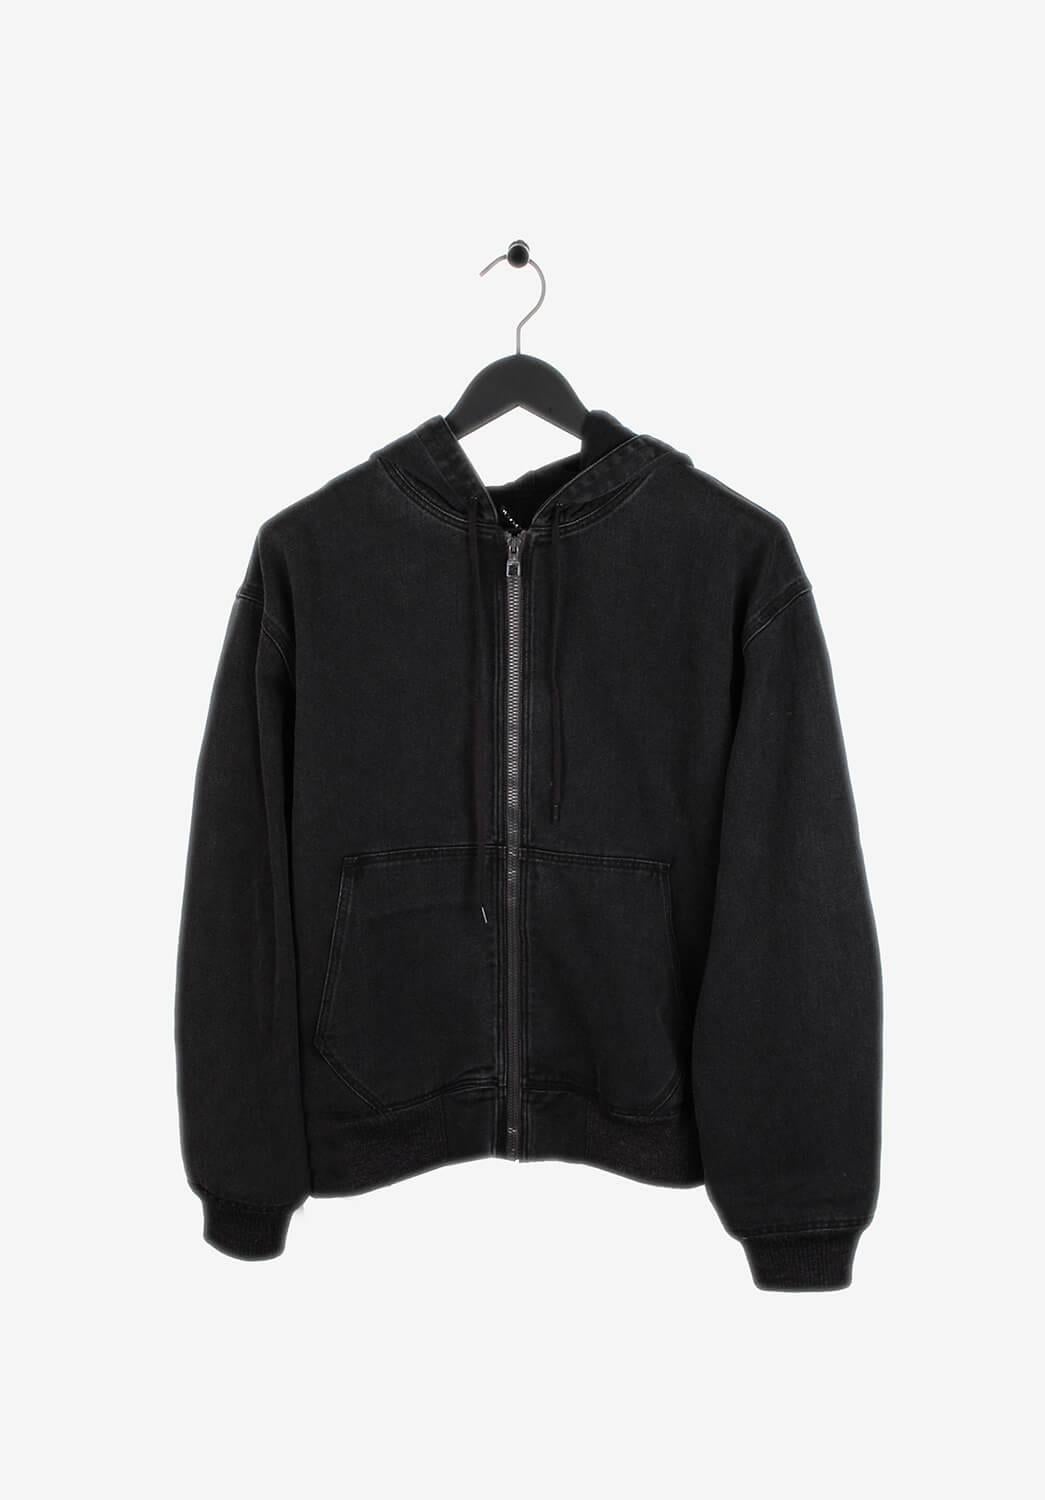 Item for sale is 100% genuine Louis Vuitton Men Denim Hooded Jacket
Color: Grey
(An actual color may a bit vary due to individual computer screen interpretation)
Material: 100% cotton
Tag size: 46IT(runs M/L)
This jacket is great quality item. Rate